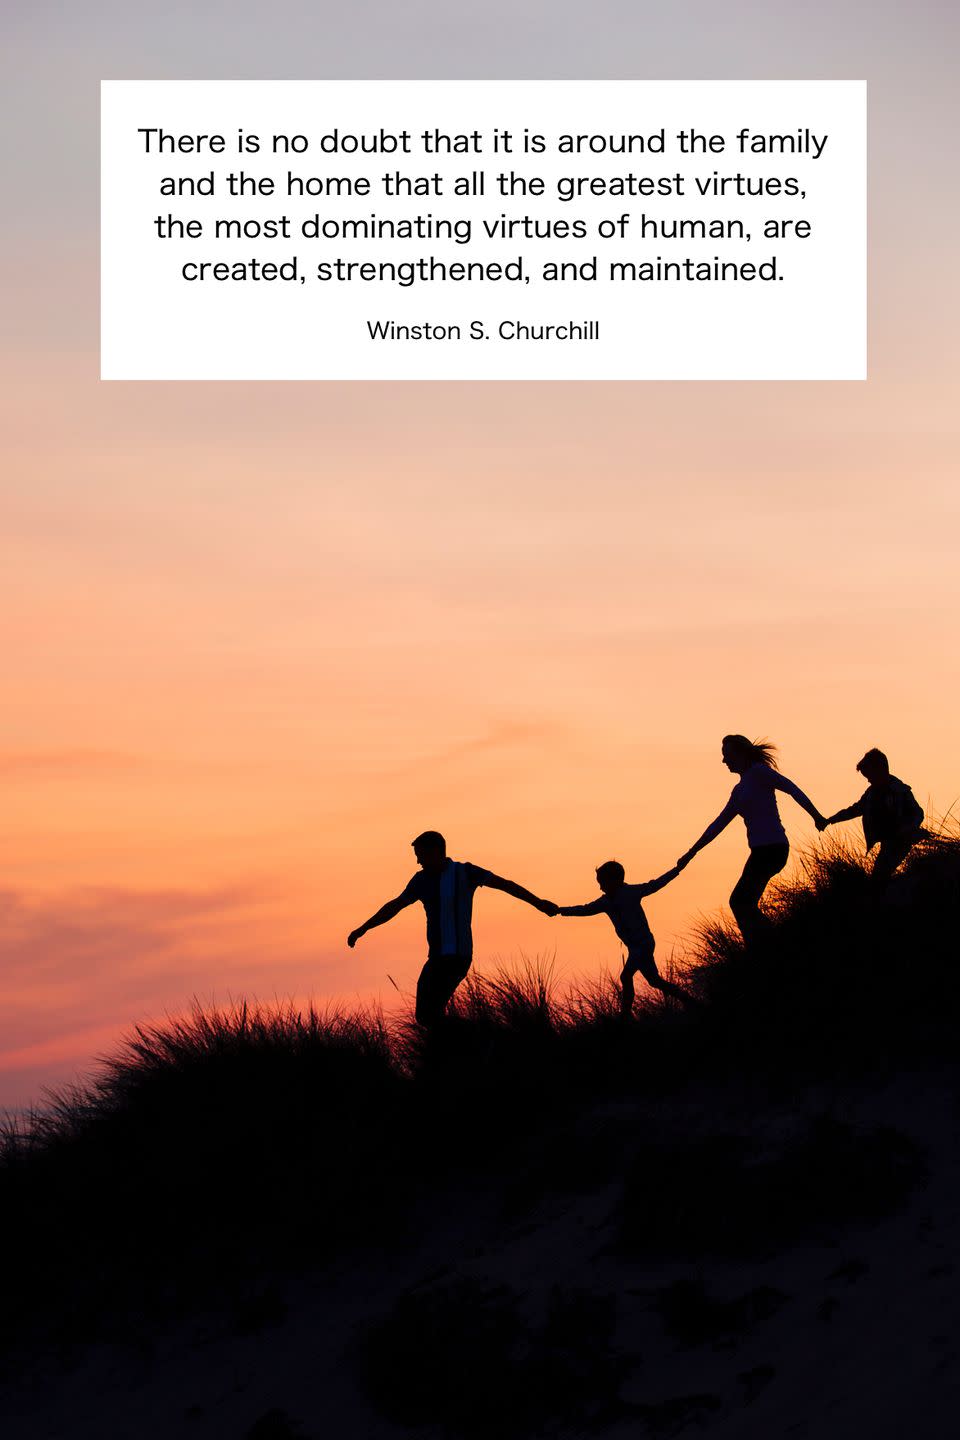 <p>"There is no doubt that it is around the family and the home that all the greatest virtues, the most dominating virtues of human, are created, strengthened, and maintained."</p>